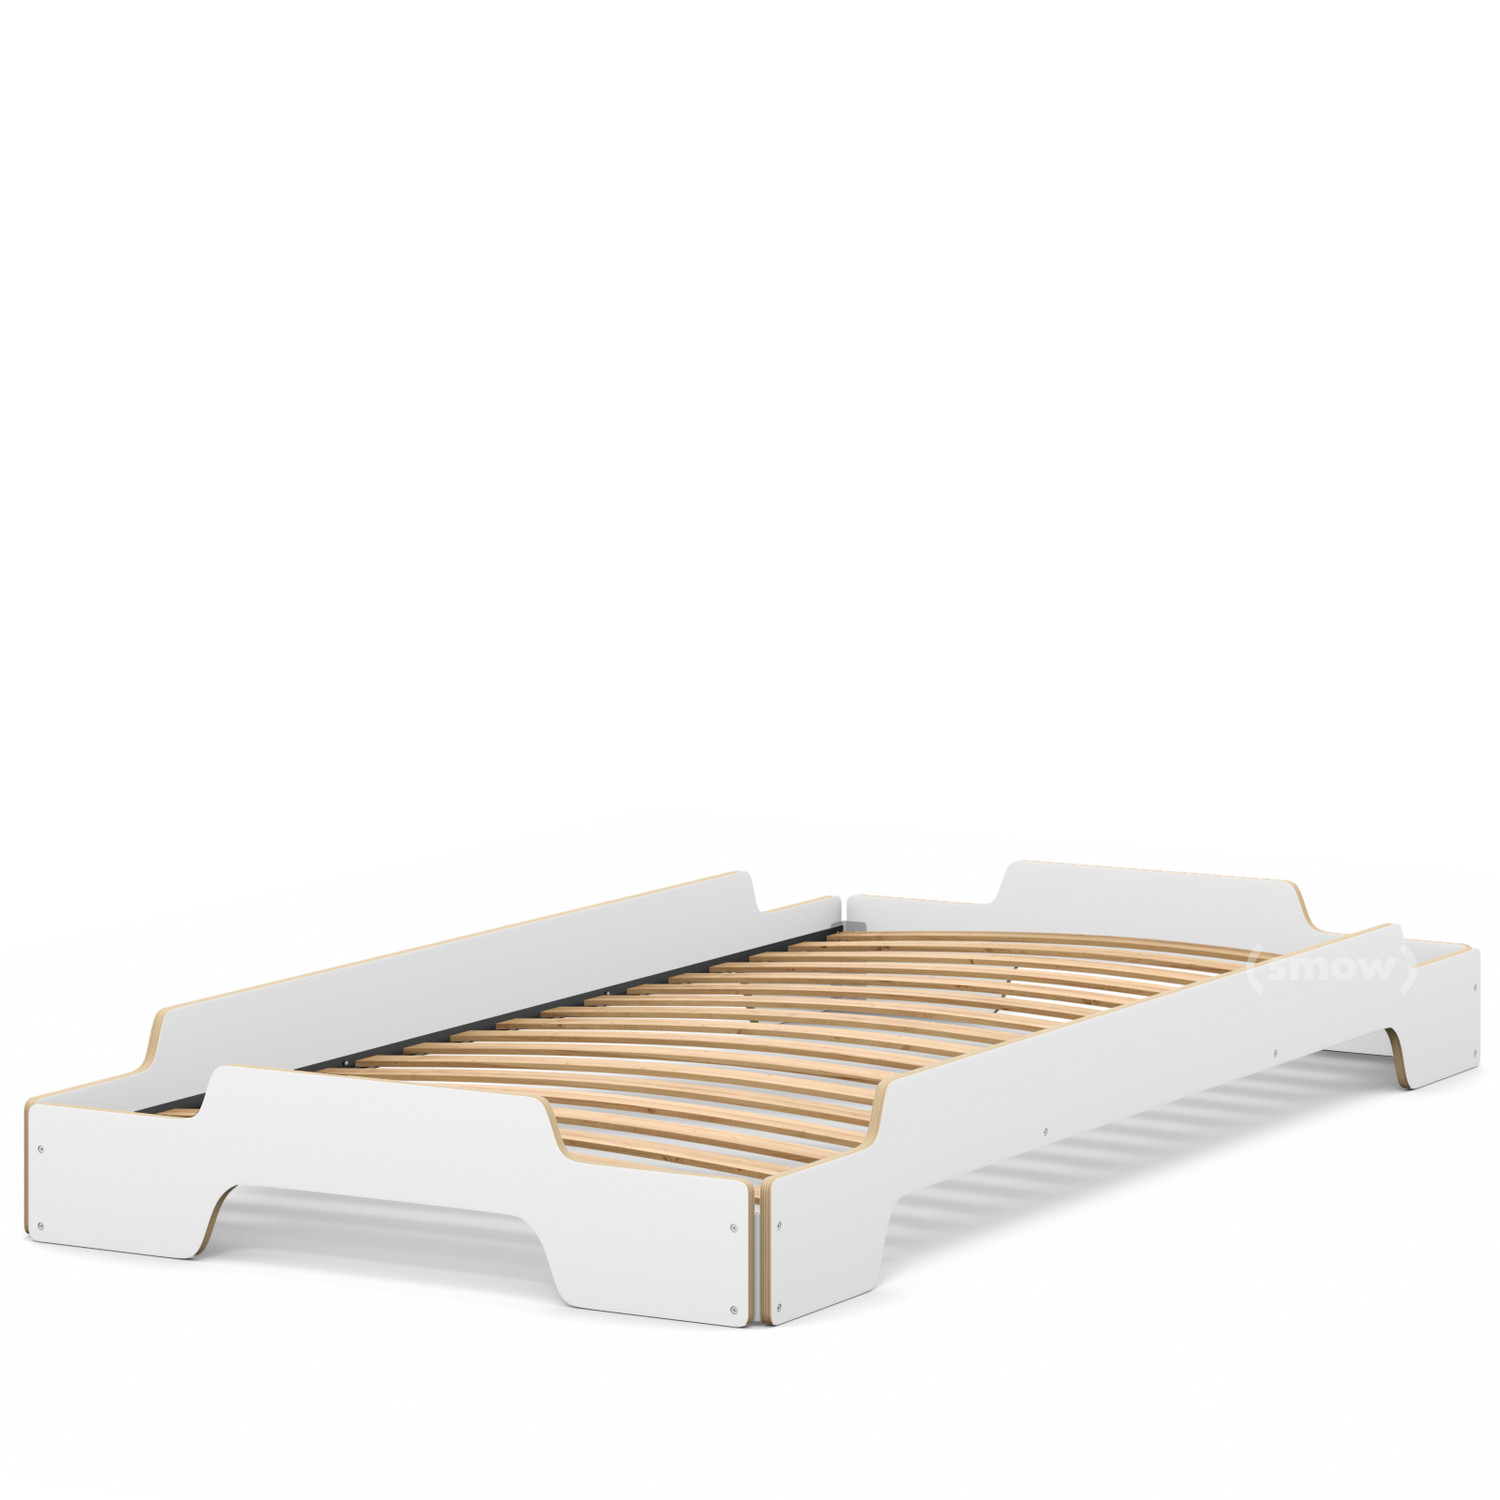 hoe te gebruiken dronken Worden Müller Small Living Stacking Bed, 100 x 200, White CPL, edges oiled and  waxed, Rollable by Rolf Heide, 1966 - Designer furniture by smow.com